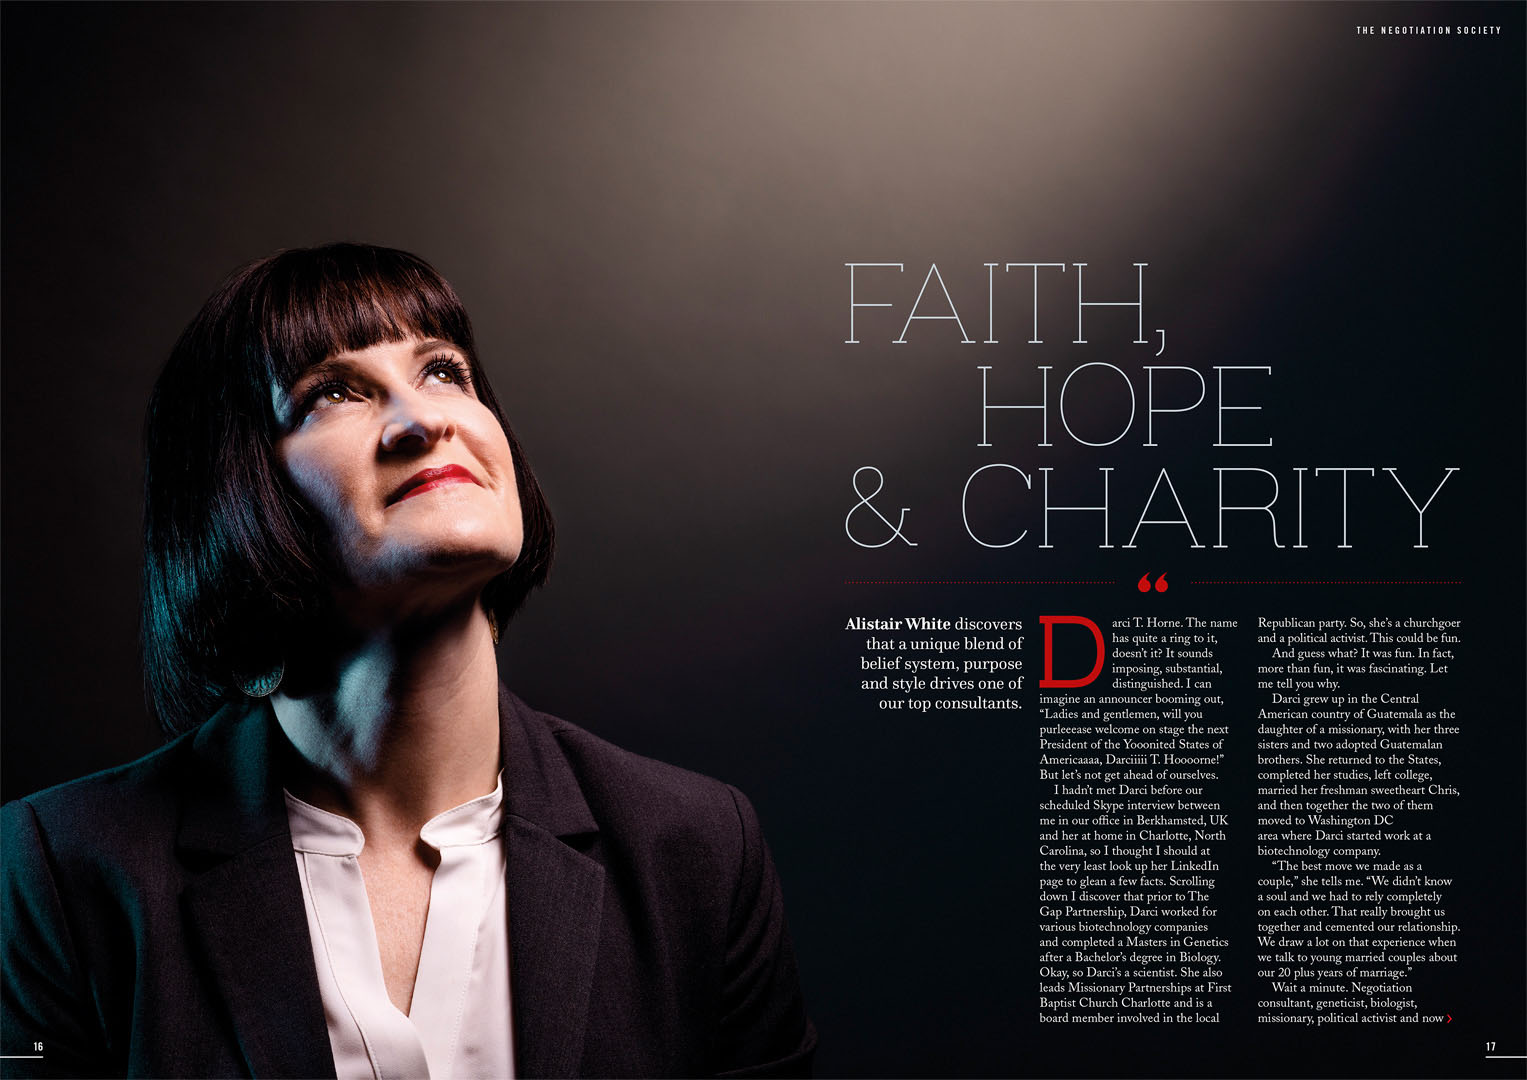 Spread from The Negotiation Society Magazine featuring Darcy T Horne